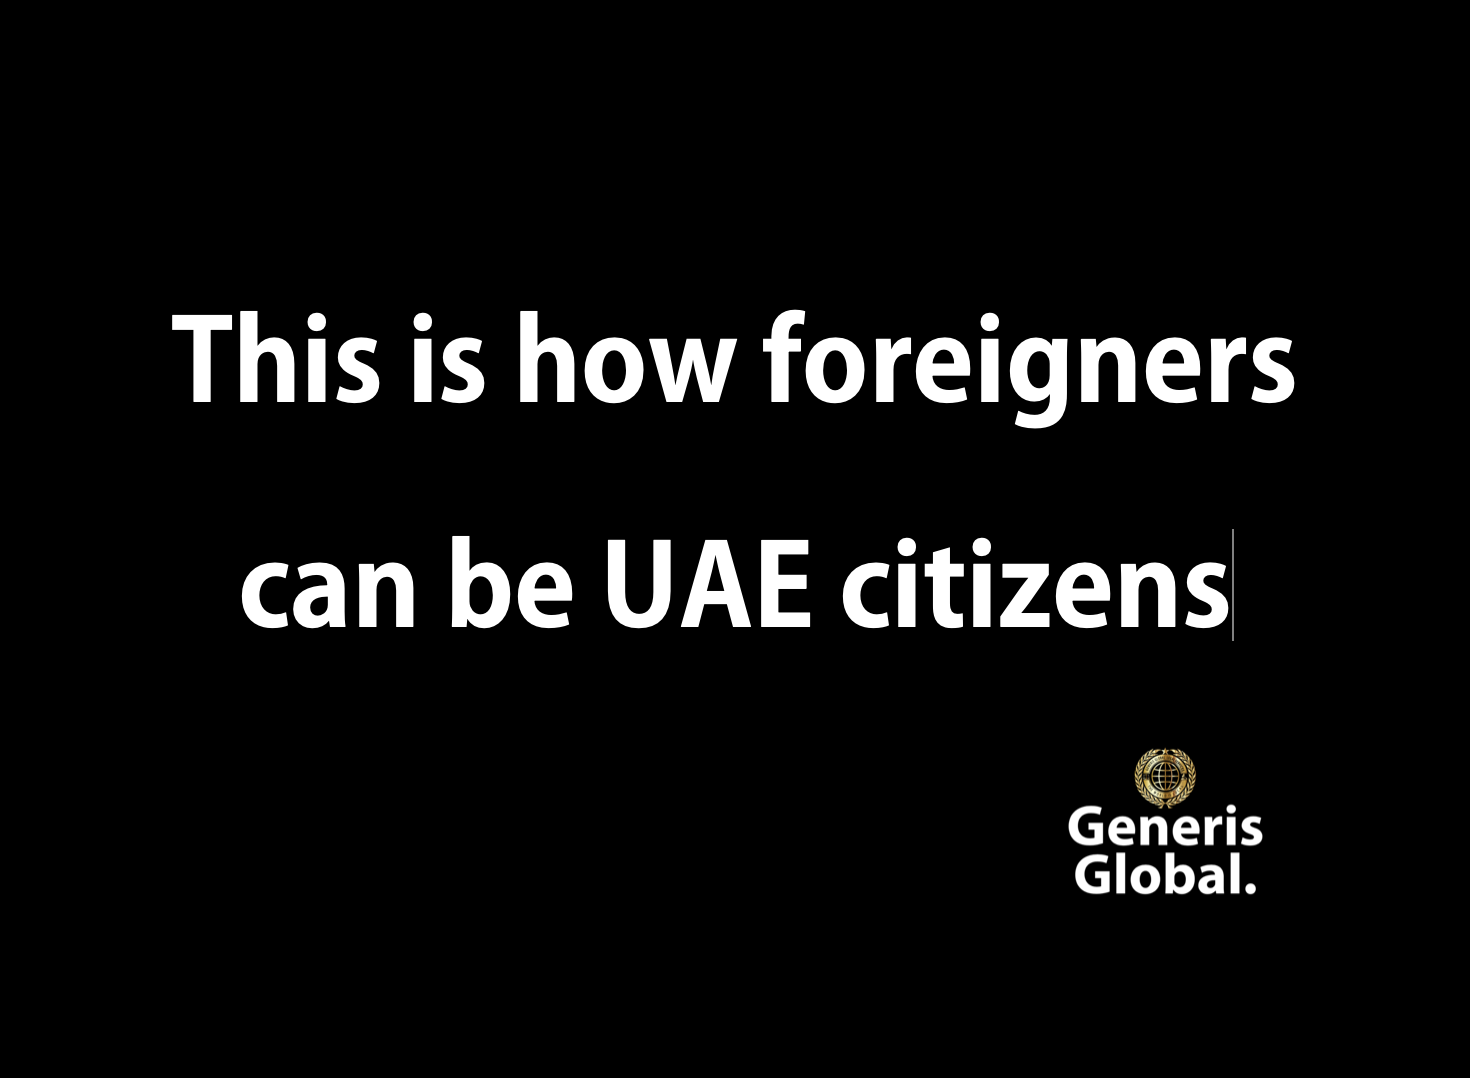 This is how foreigners can be UAE citizens